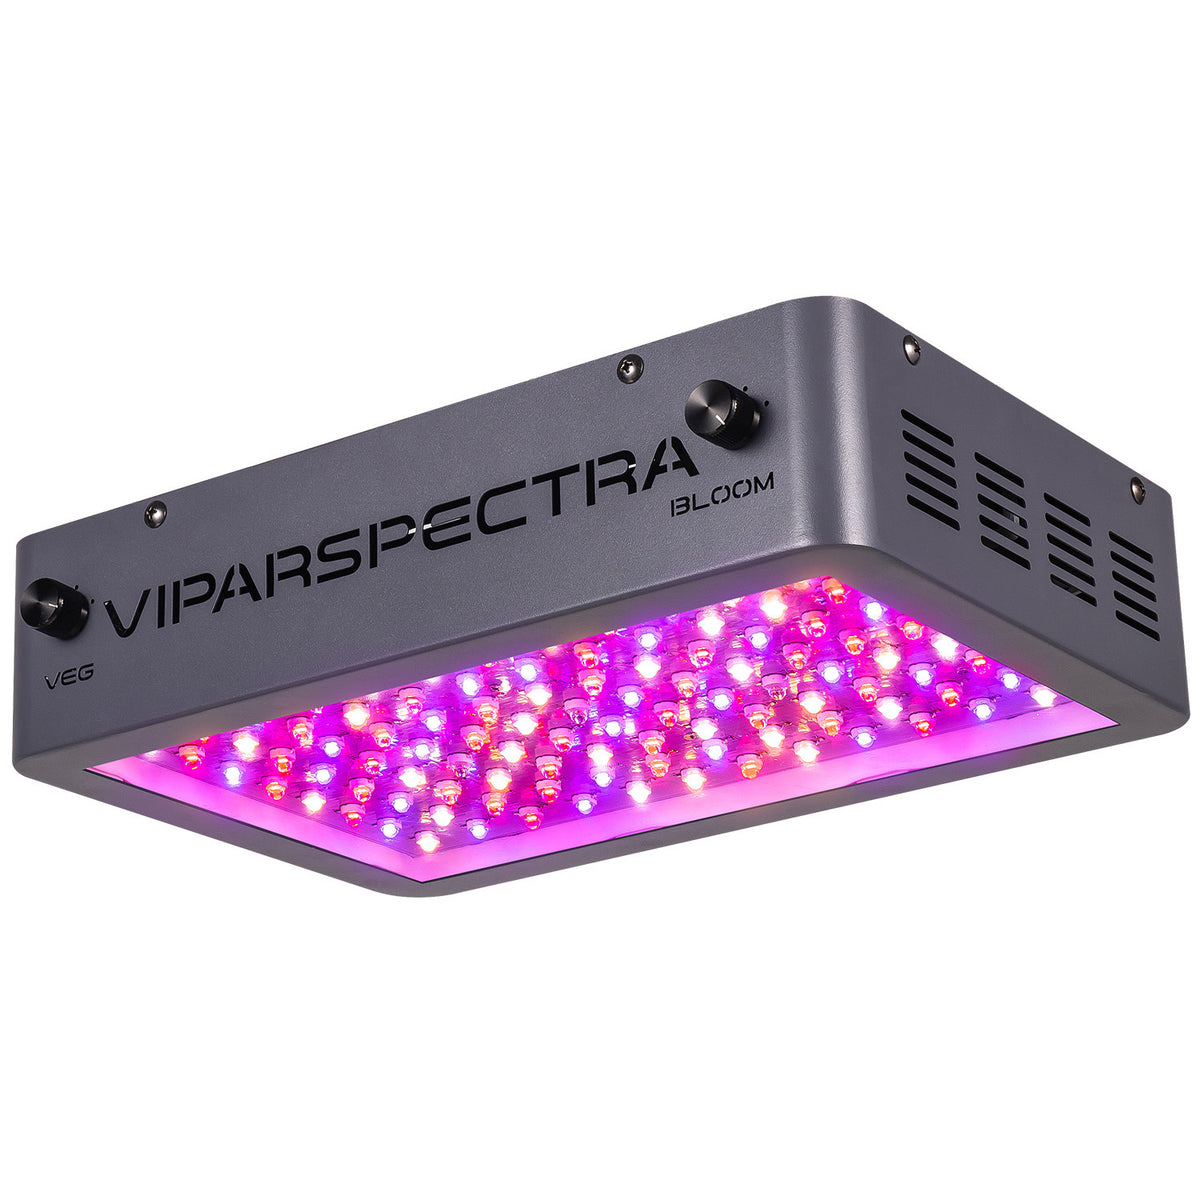 www.viparspectra.com